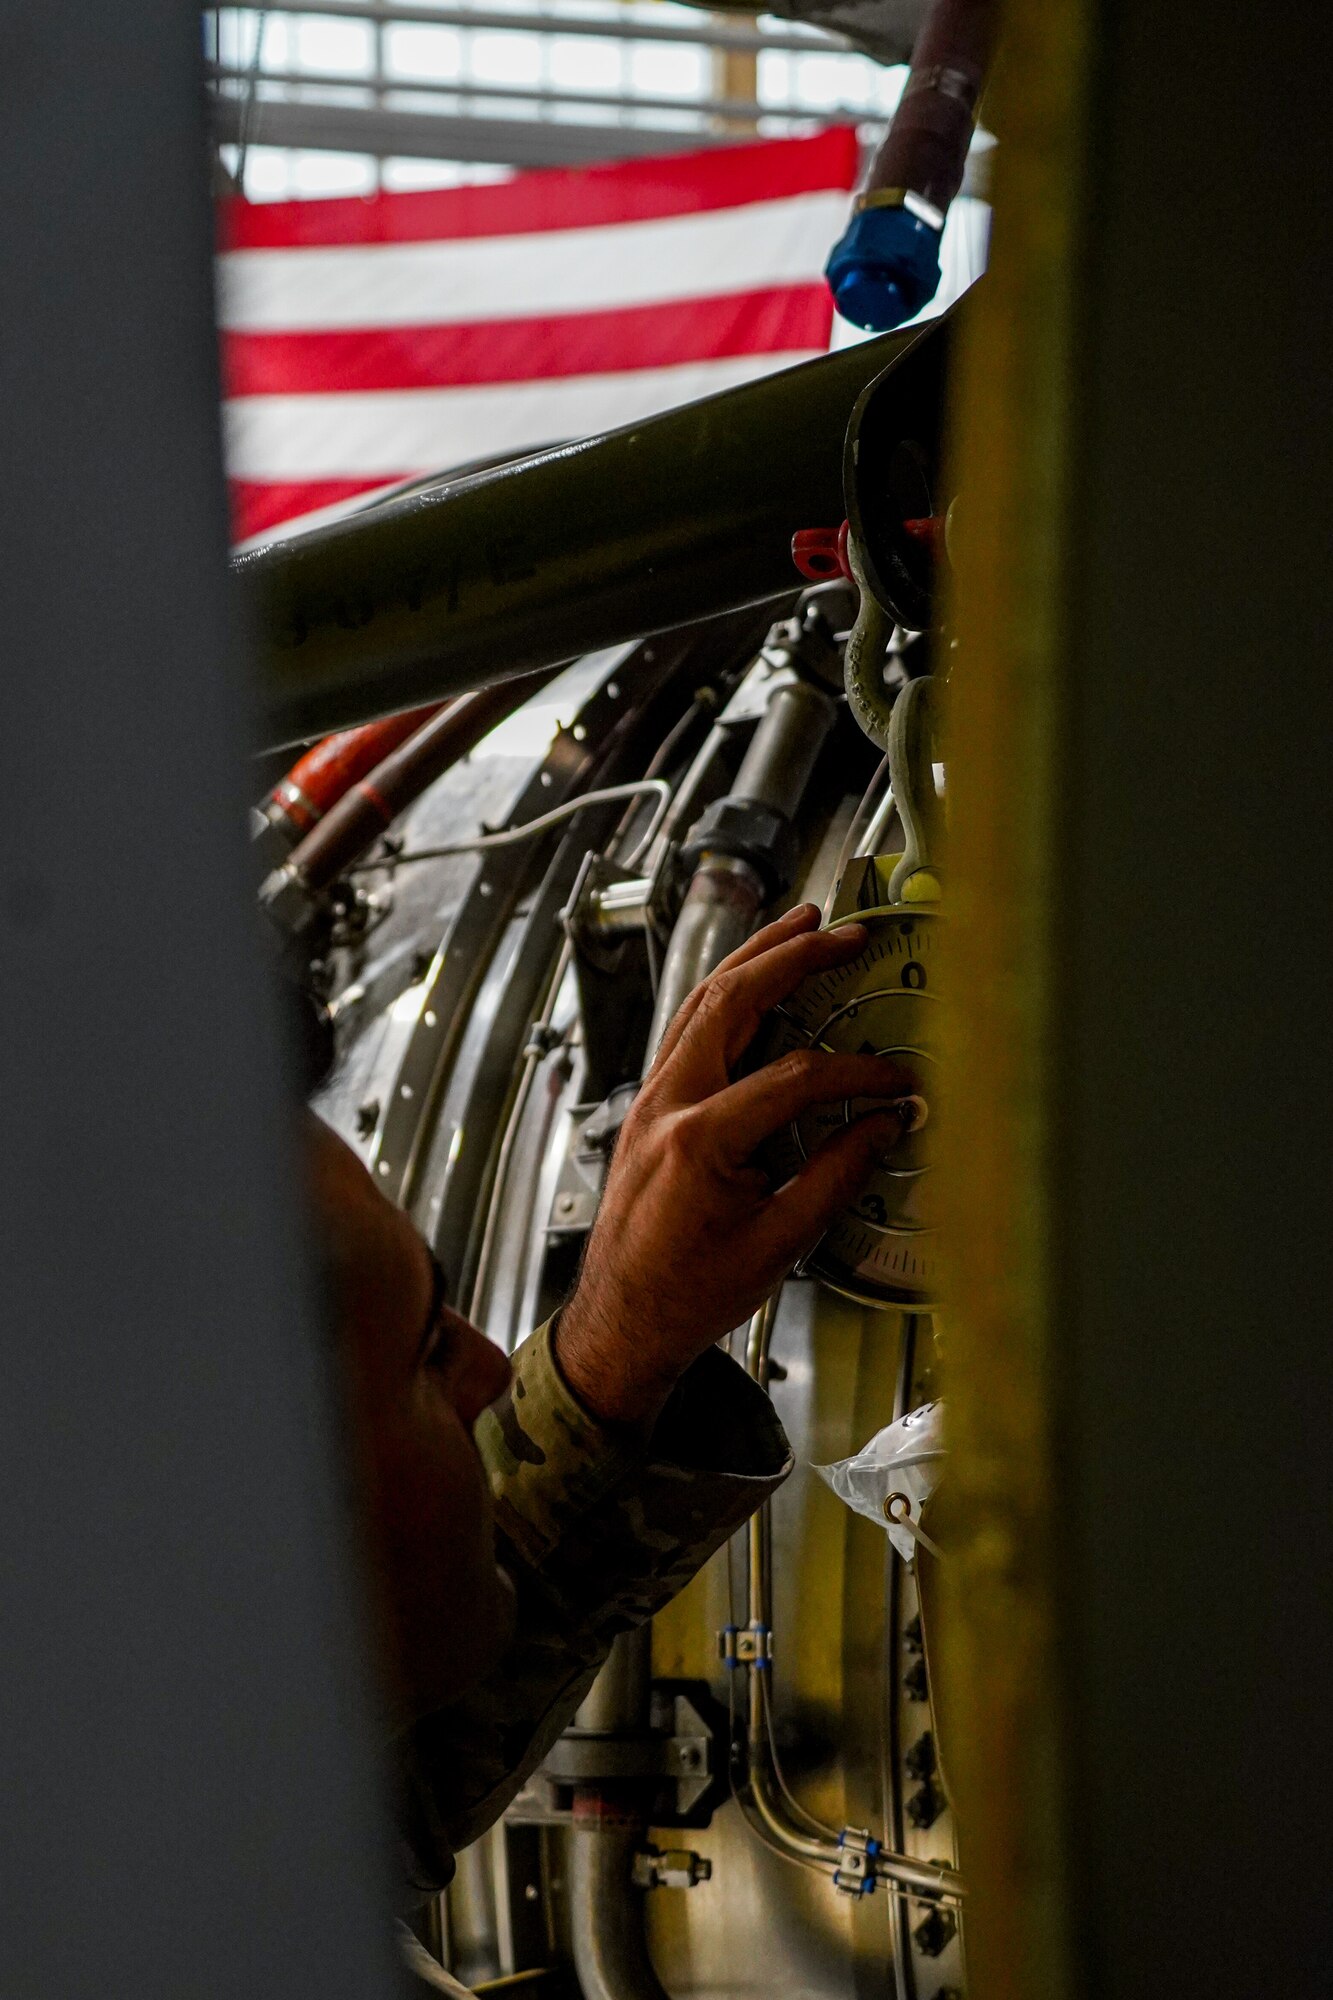 Tech. Sgt. Thomas Carozzolo, an aerospace propulsion specialist assigned to the 914th Aircraft Maintenance Squadron at Niagara Falls Air Reserve Station, New York, carefully inspects a weight gauge attached to a KC-135 Stratotanker engine on Oct. 18, 2022. The engine's weight must be carefully distributed across the engine while it's being jacked into place to properly install it onto the Stratotanker. (U.S. Air Force photo by 1st Lt. Lucas Morrow)